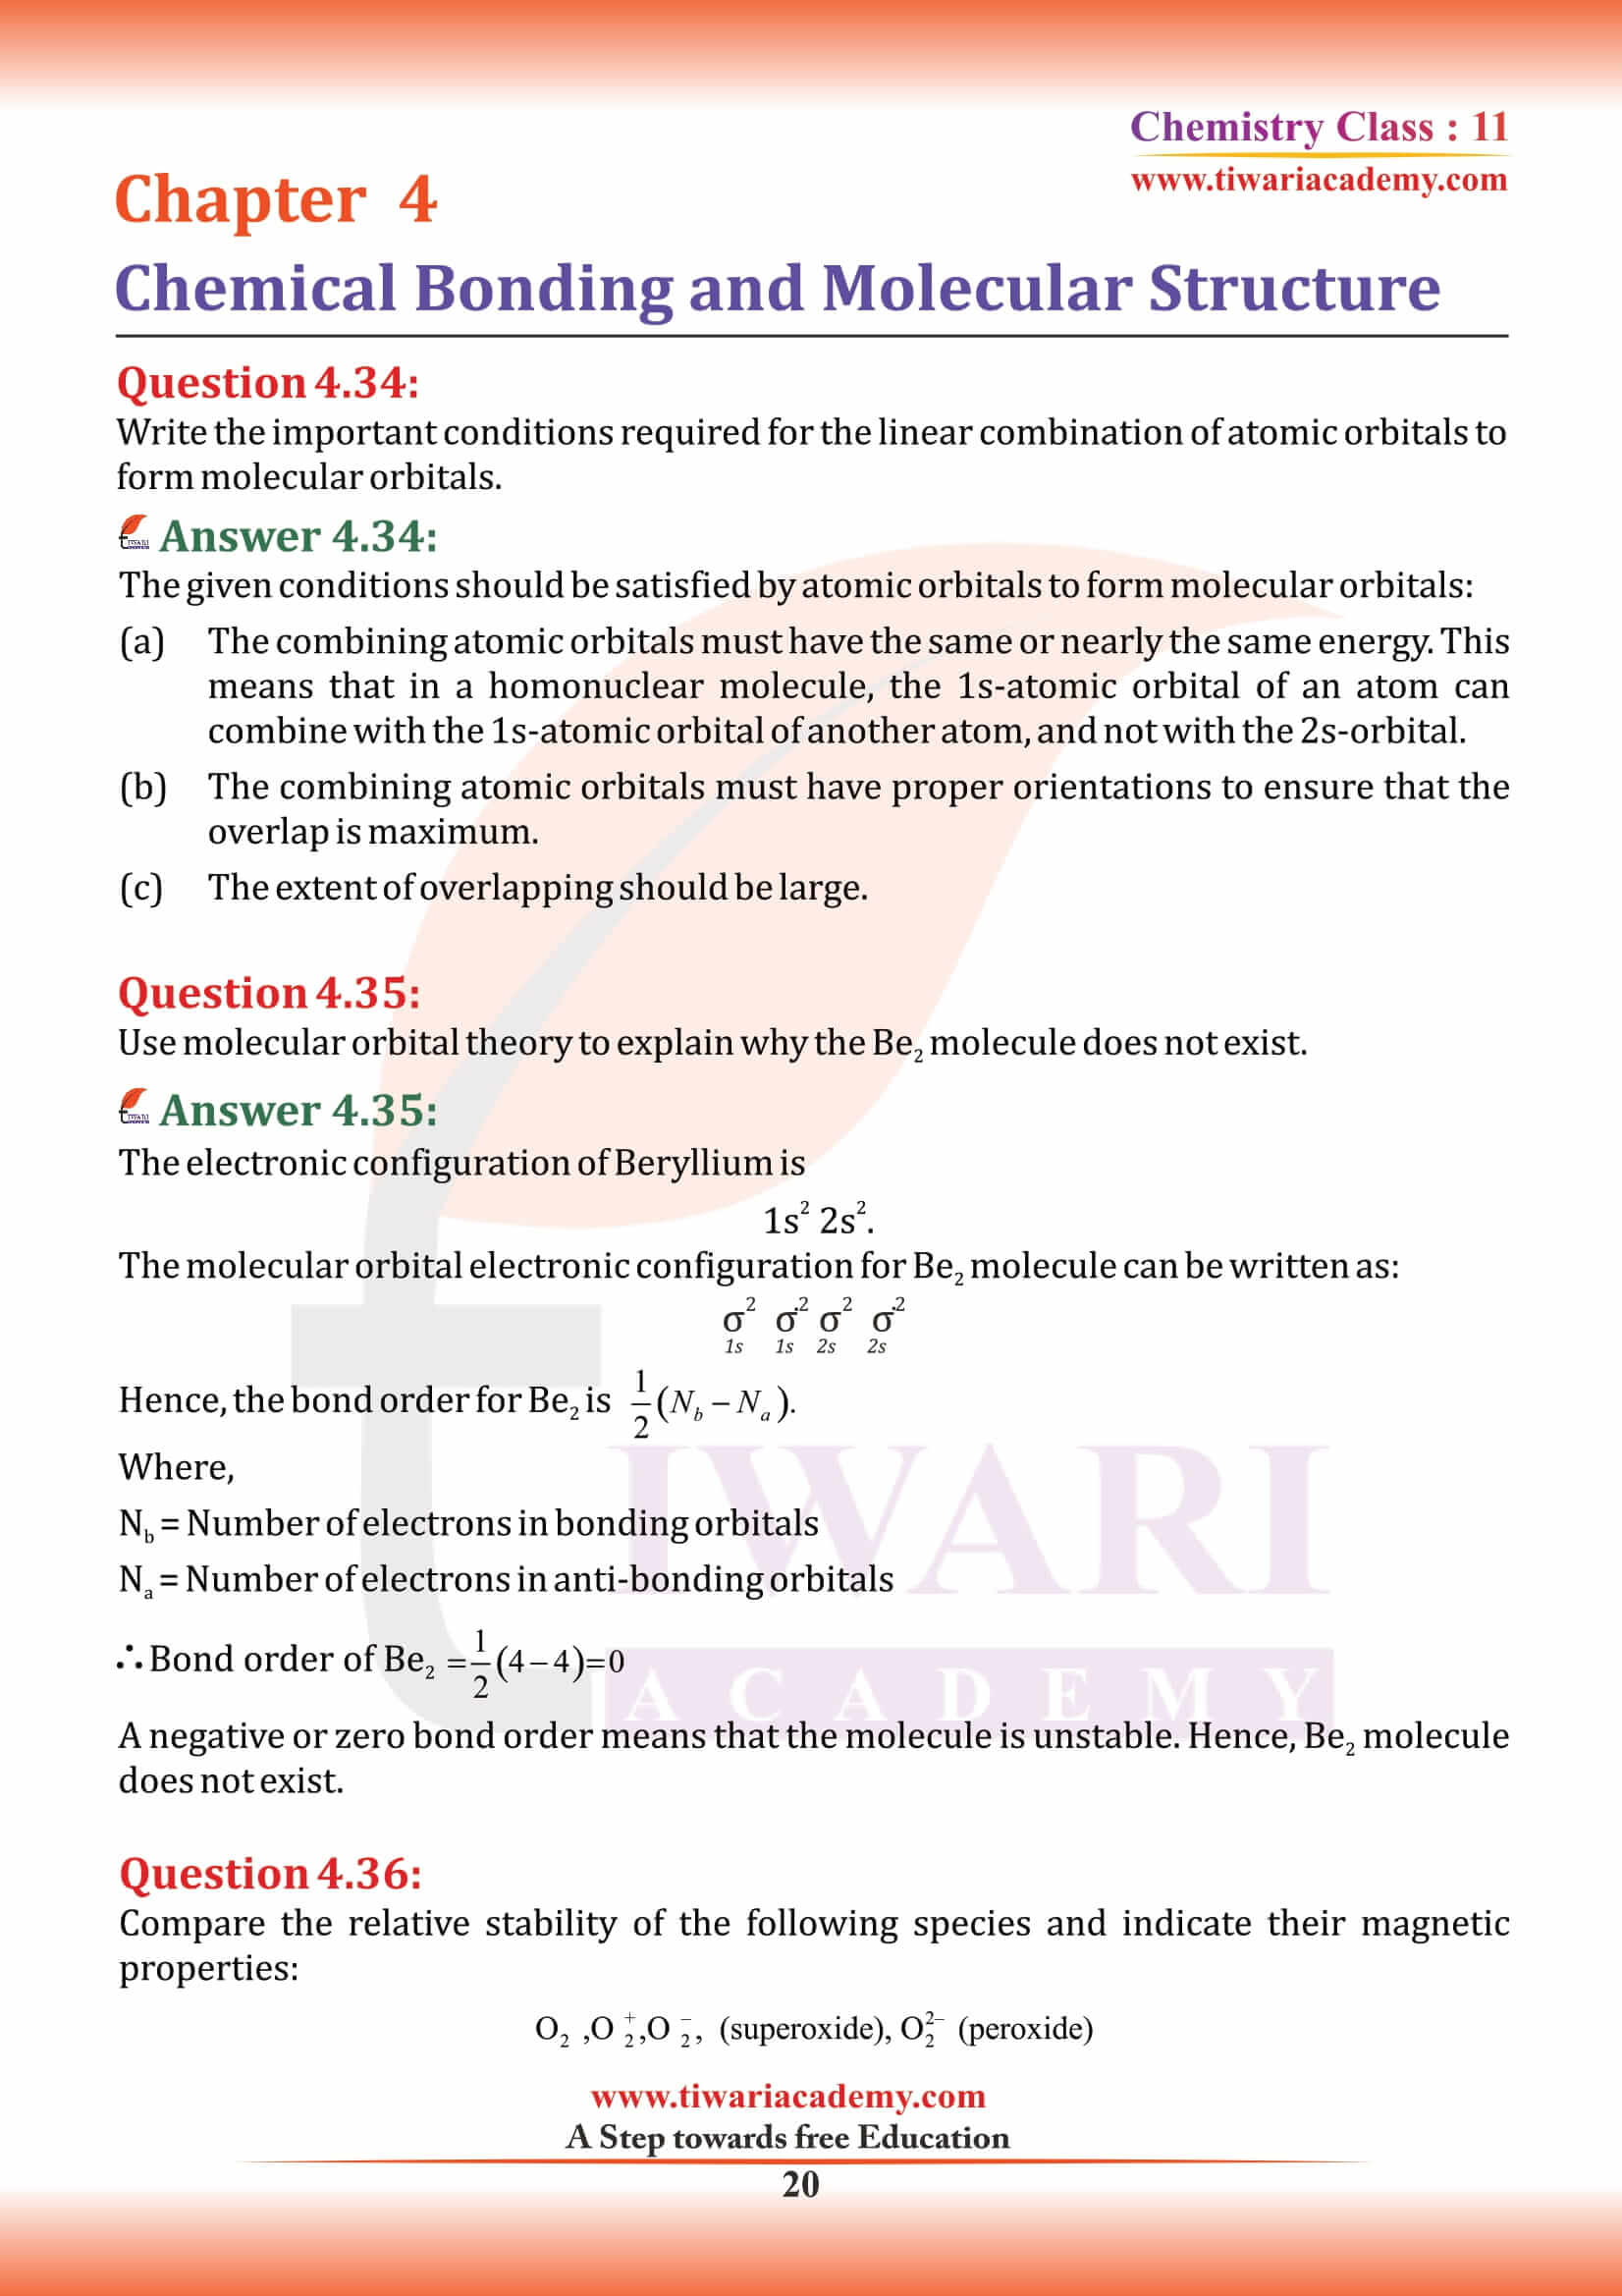 Class 11 Chemistry Chapter 4 guide in English